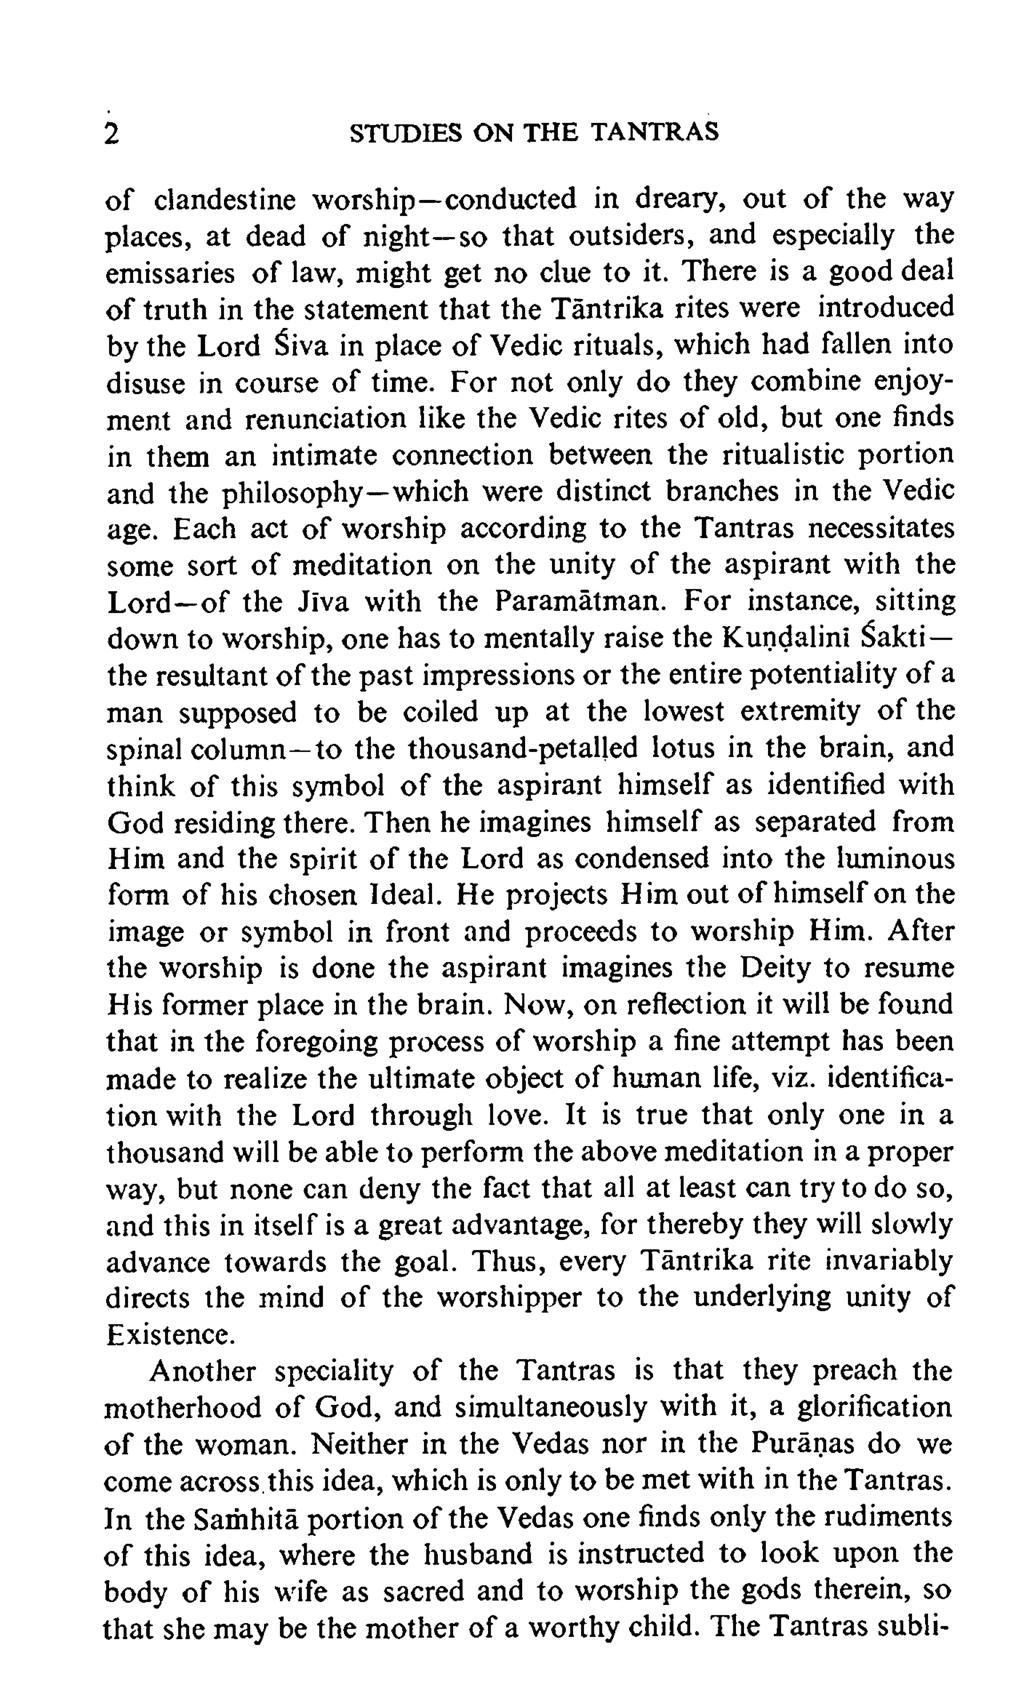 2 STUDIES ON THE TANTRAS of clandestine worship conducted in dreary, out of the way places, at dead of night so that outsiders, and especially the emissaries o f law, might get no clue to it.